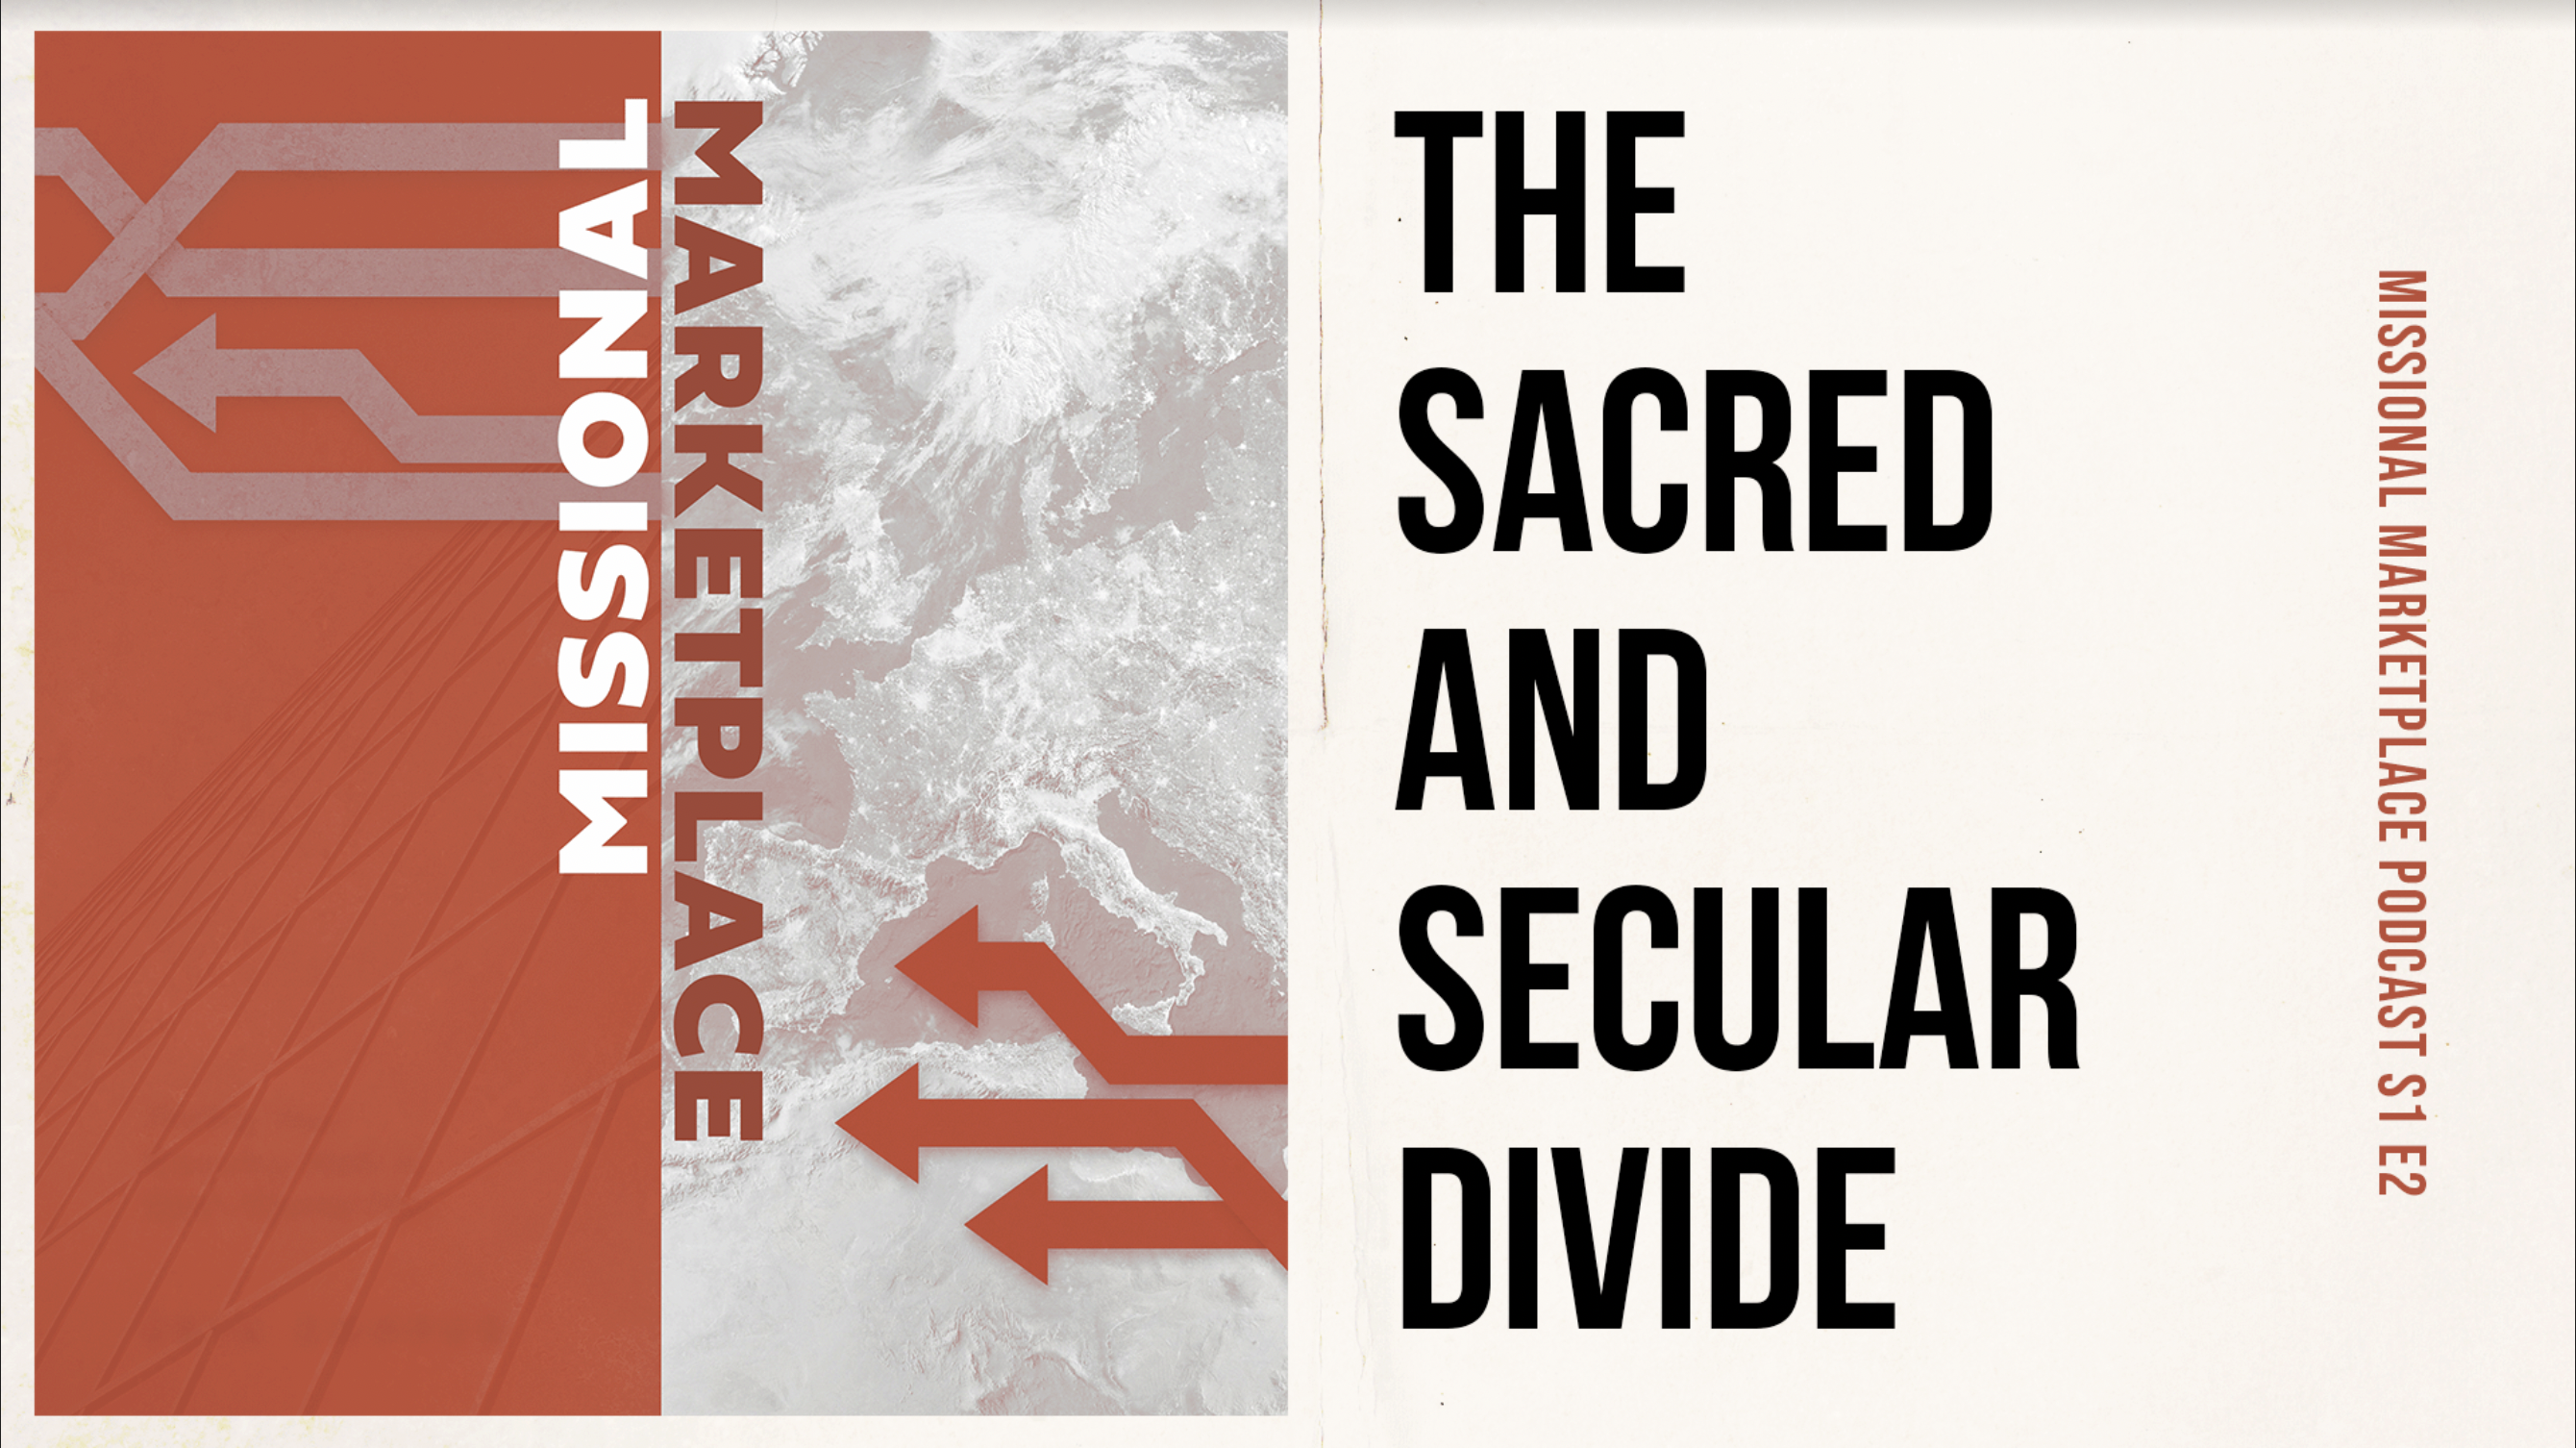 Missional Marketplace S1 E2: The Sacred and Secular Divide